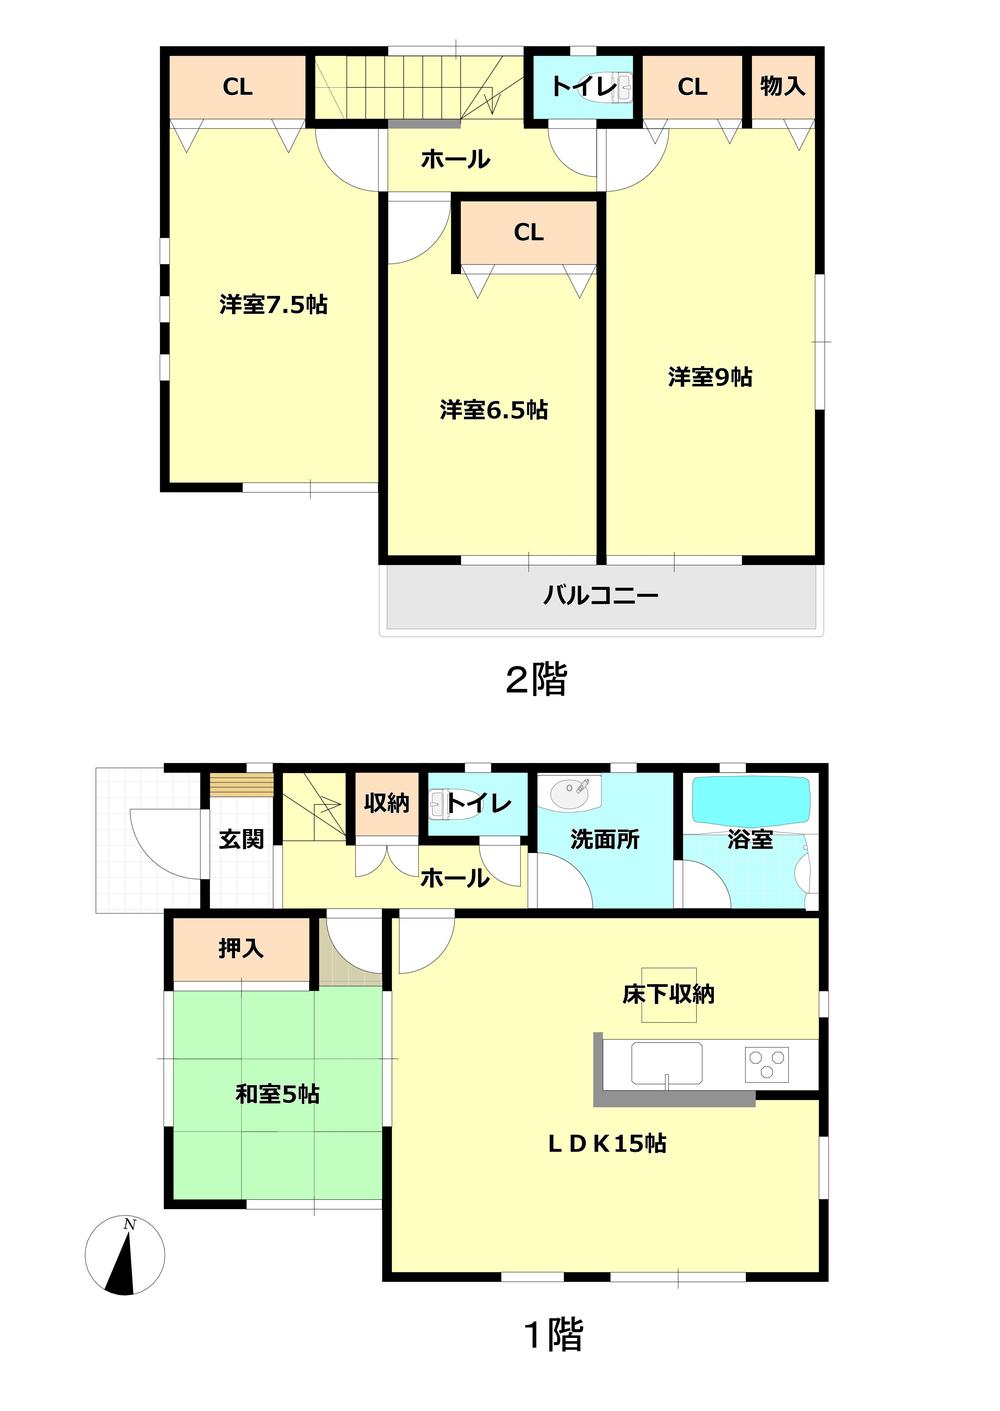 Floor plan. 15.8 million yen, 4LDK, Land area 220.5 sq m , We will give priority to the building area 96.39 sq m Current Status. 